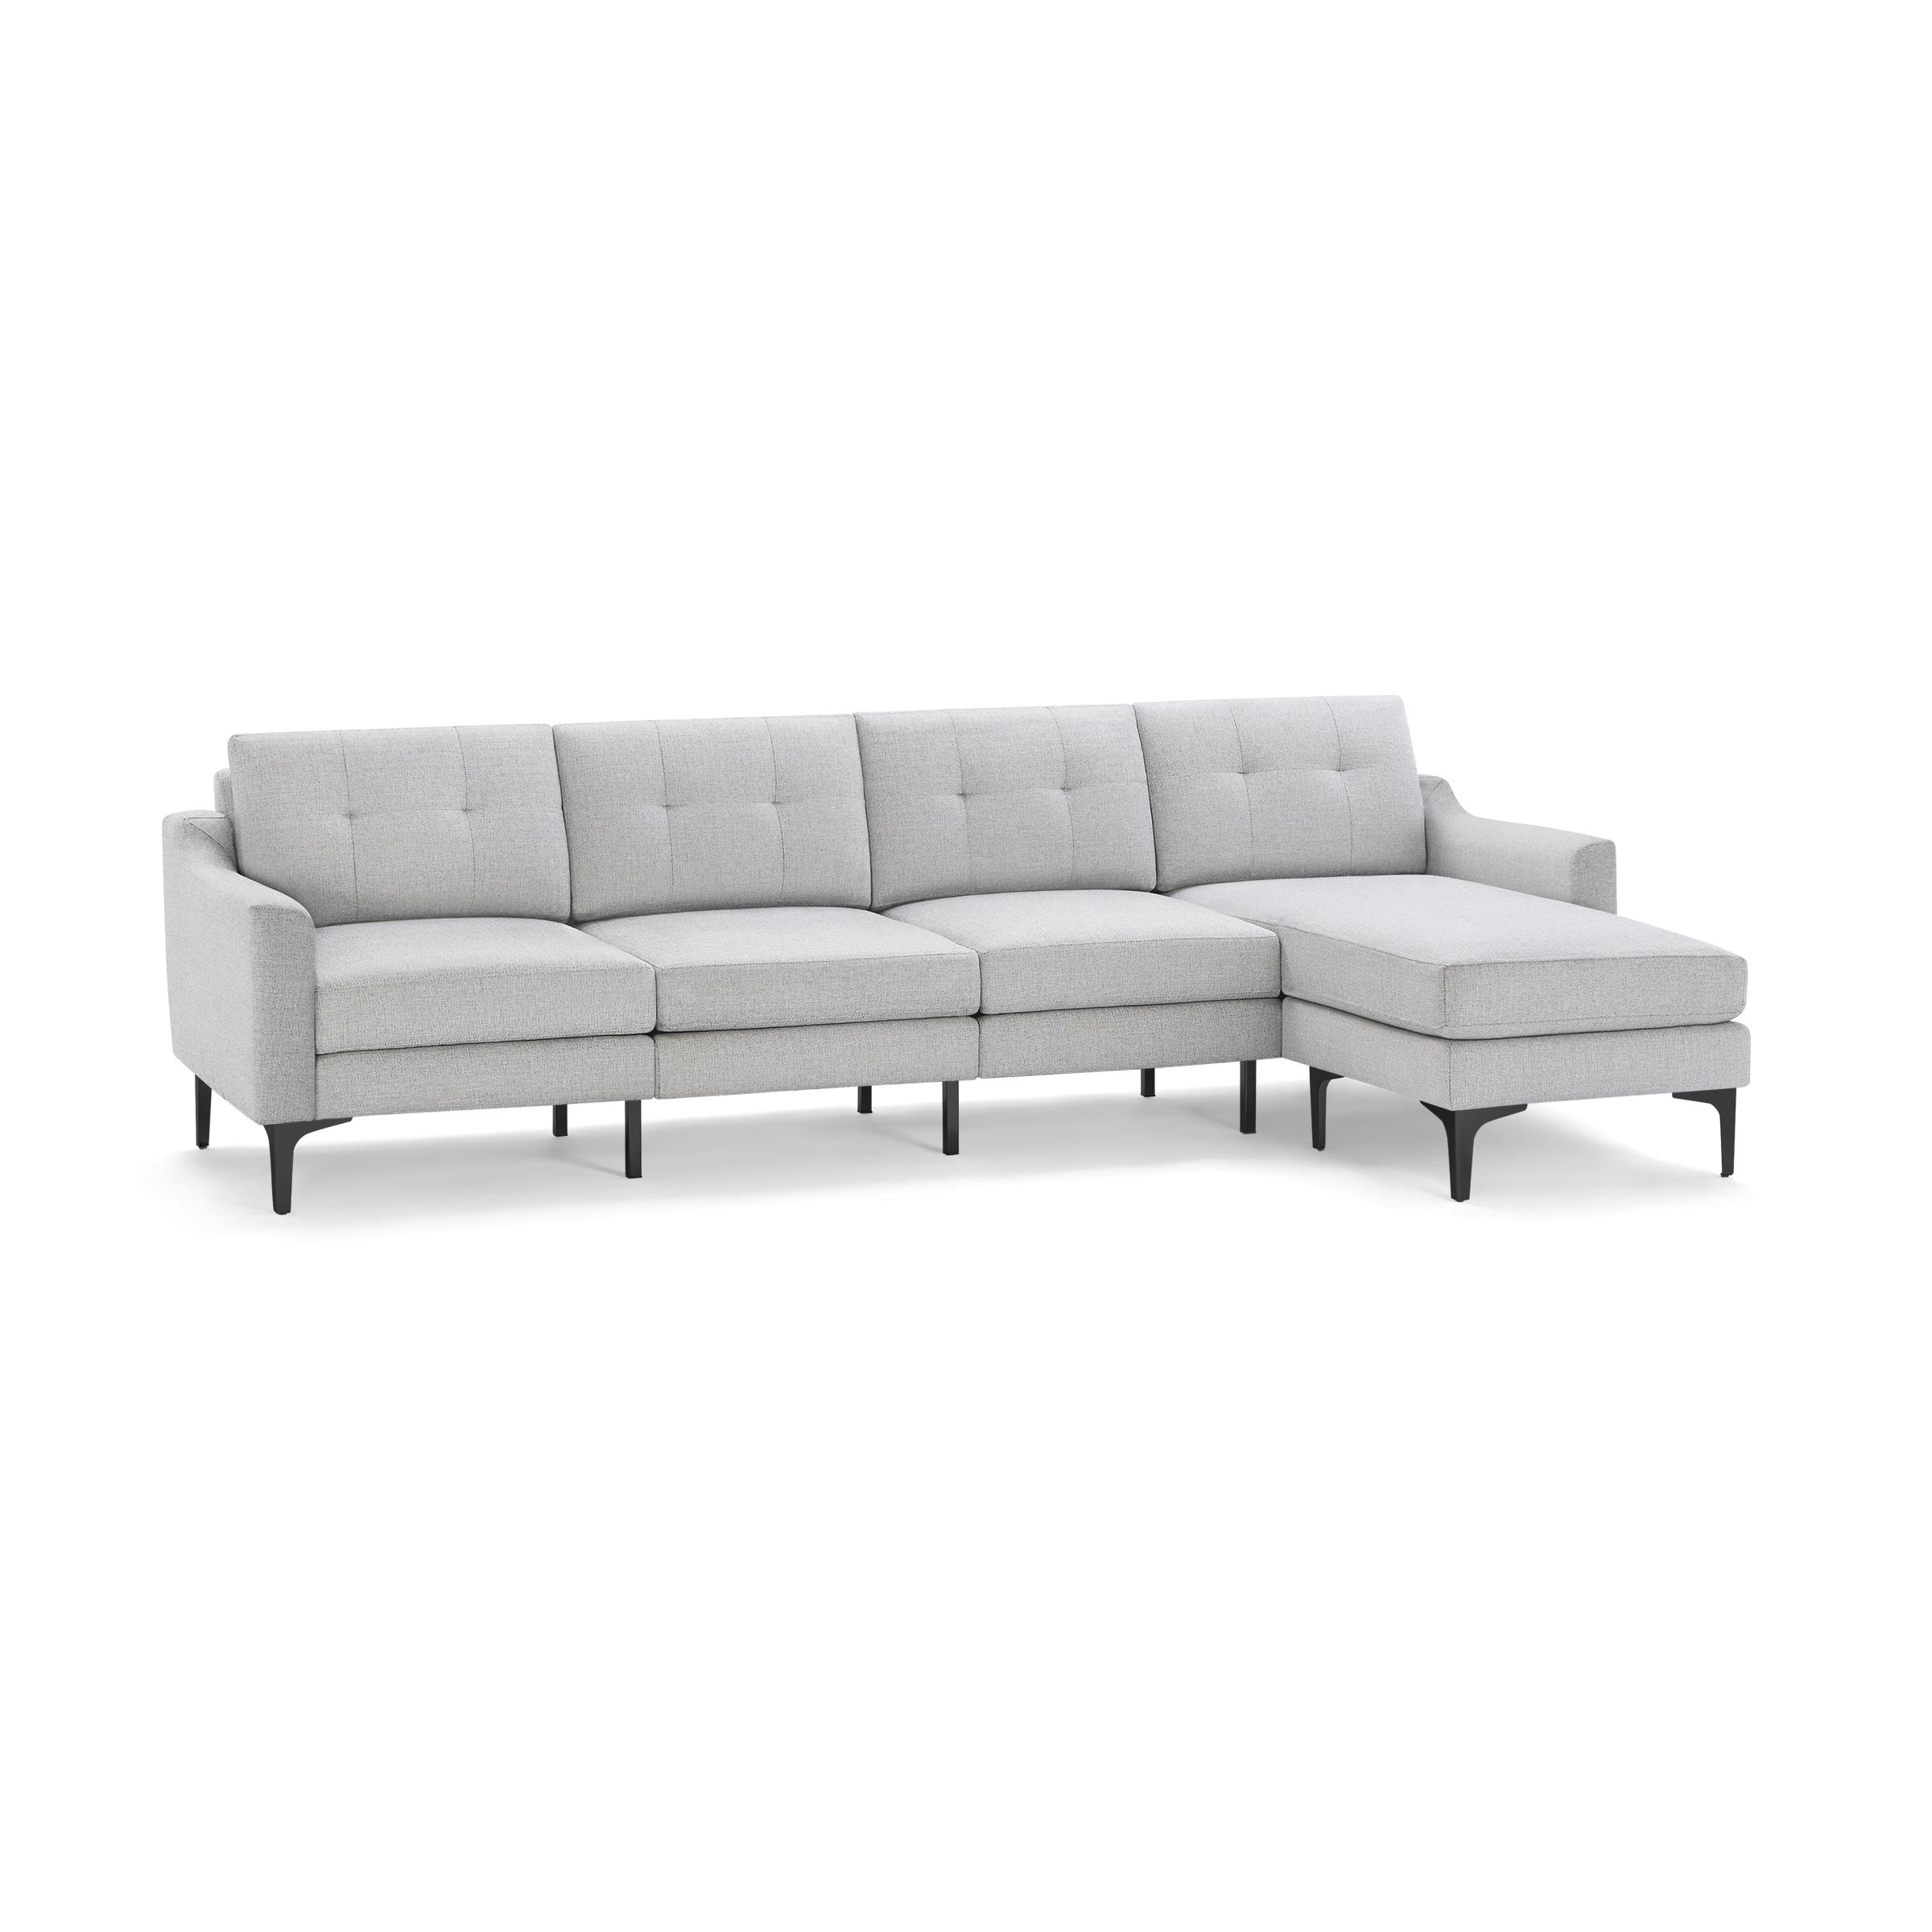 The Slope Nomad King Sectional Sofa in Crushed Gravel with Black Metal Legs - Image 0